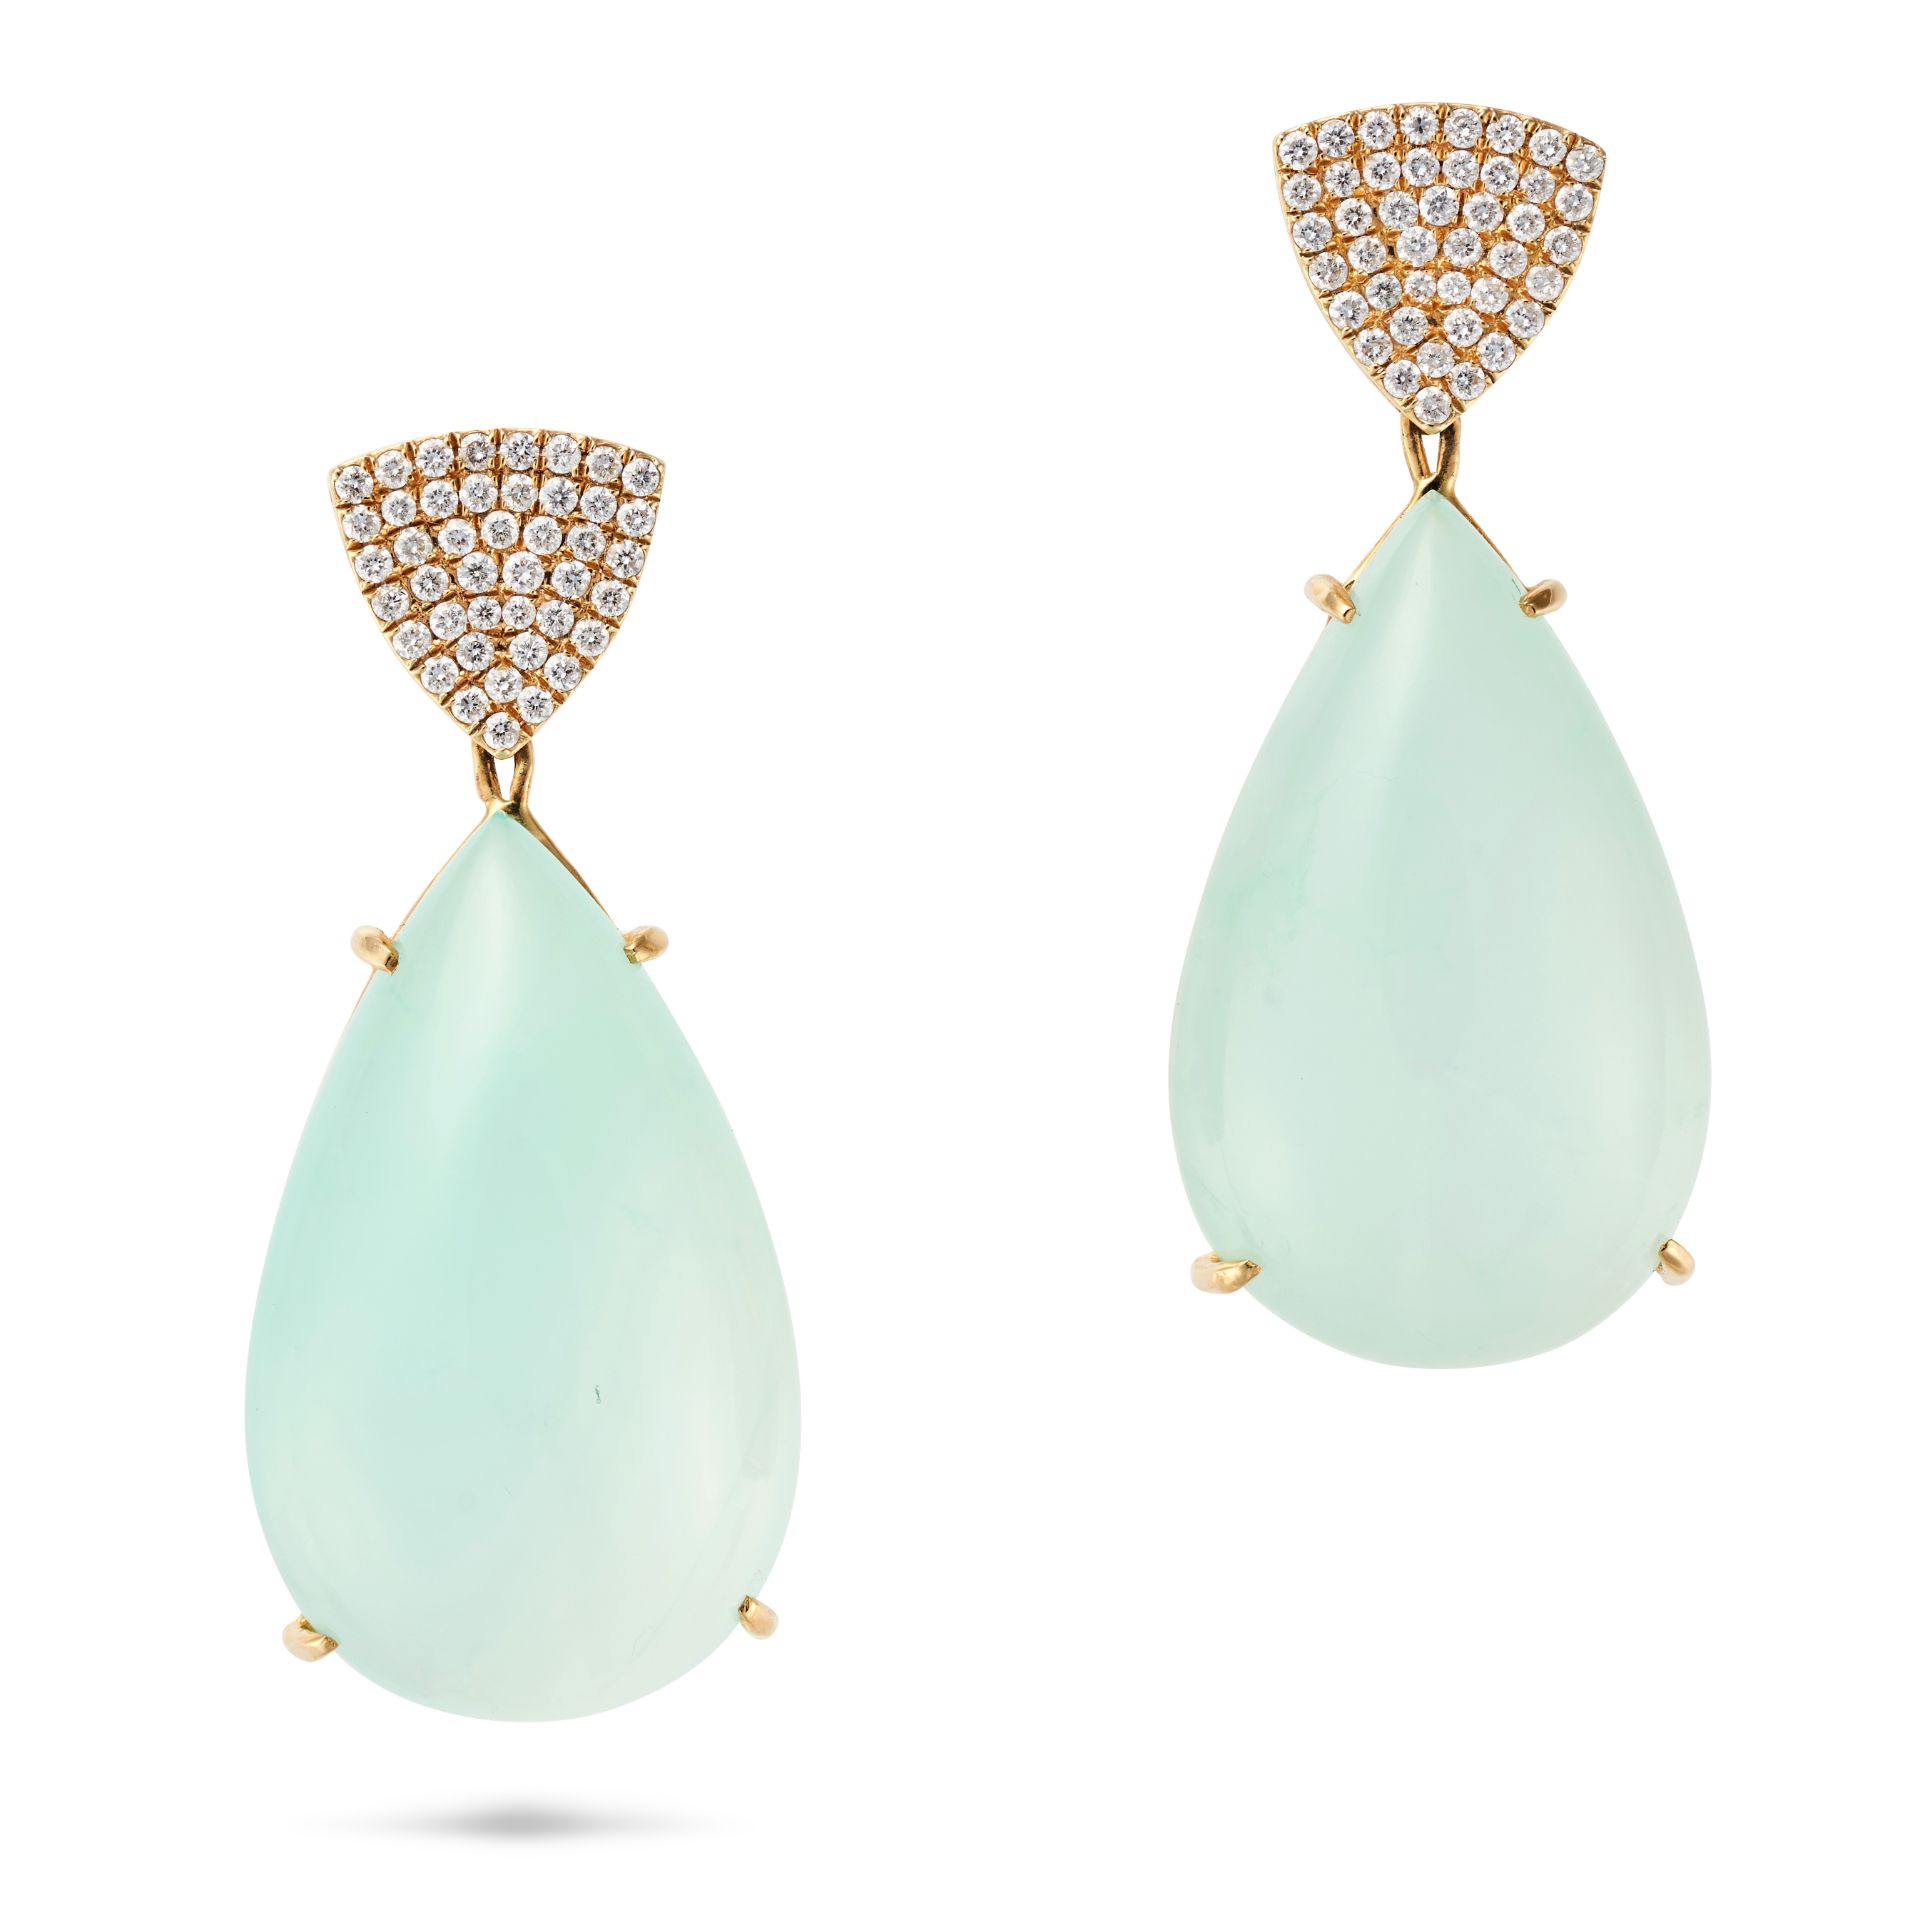 A PAIR OF AQUA CHALCEDONY AND DIAMOND DROP EARRINGS each pave set with round cut diamonds, suspen...